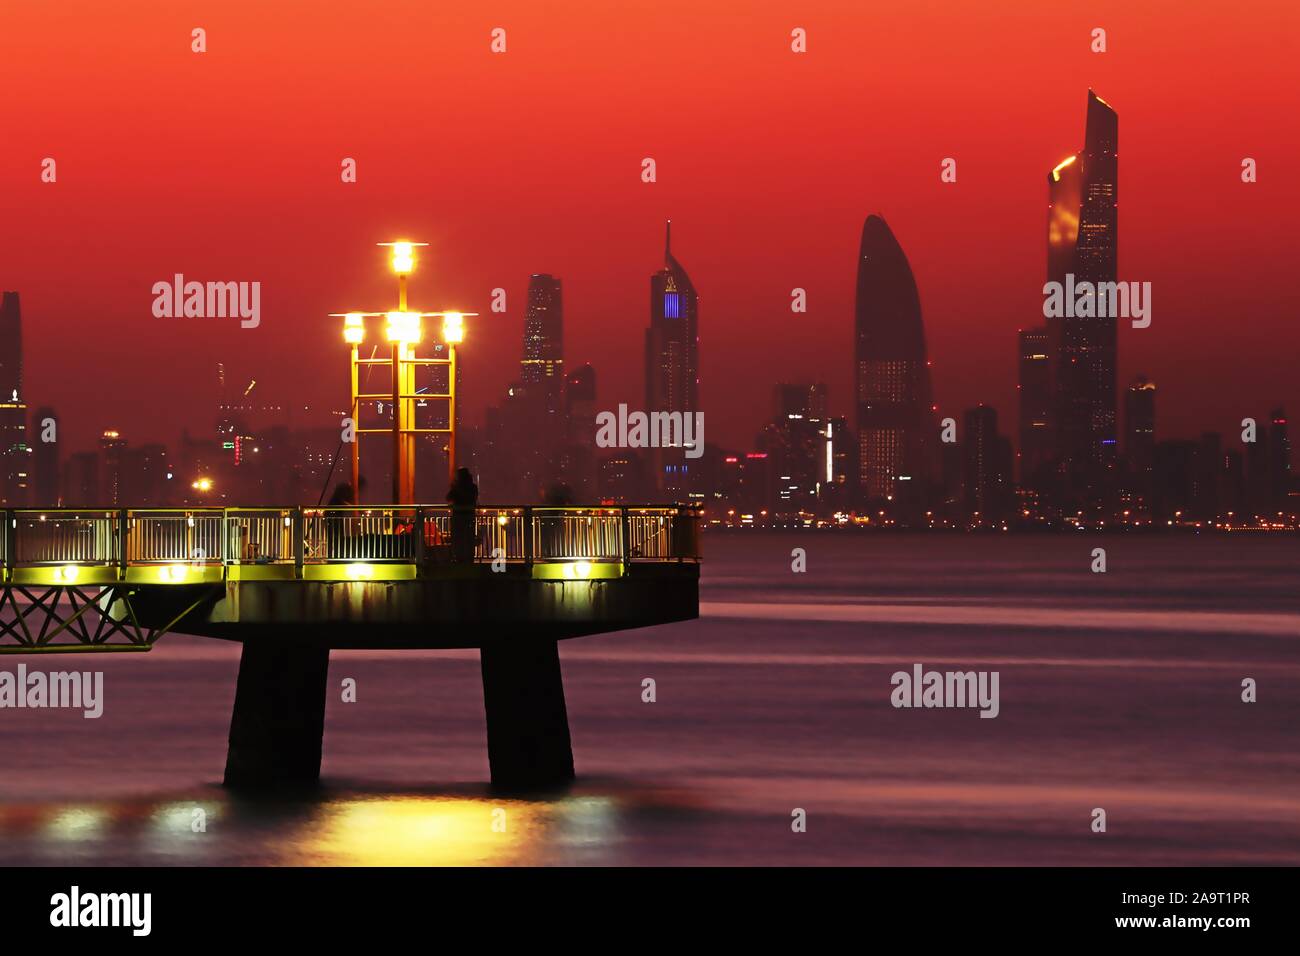 Kuwait City/Kuwait - 10/10/2019: Pier at sunset with skyline silhouette of Kuwait City in the background Stock Photo